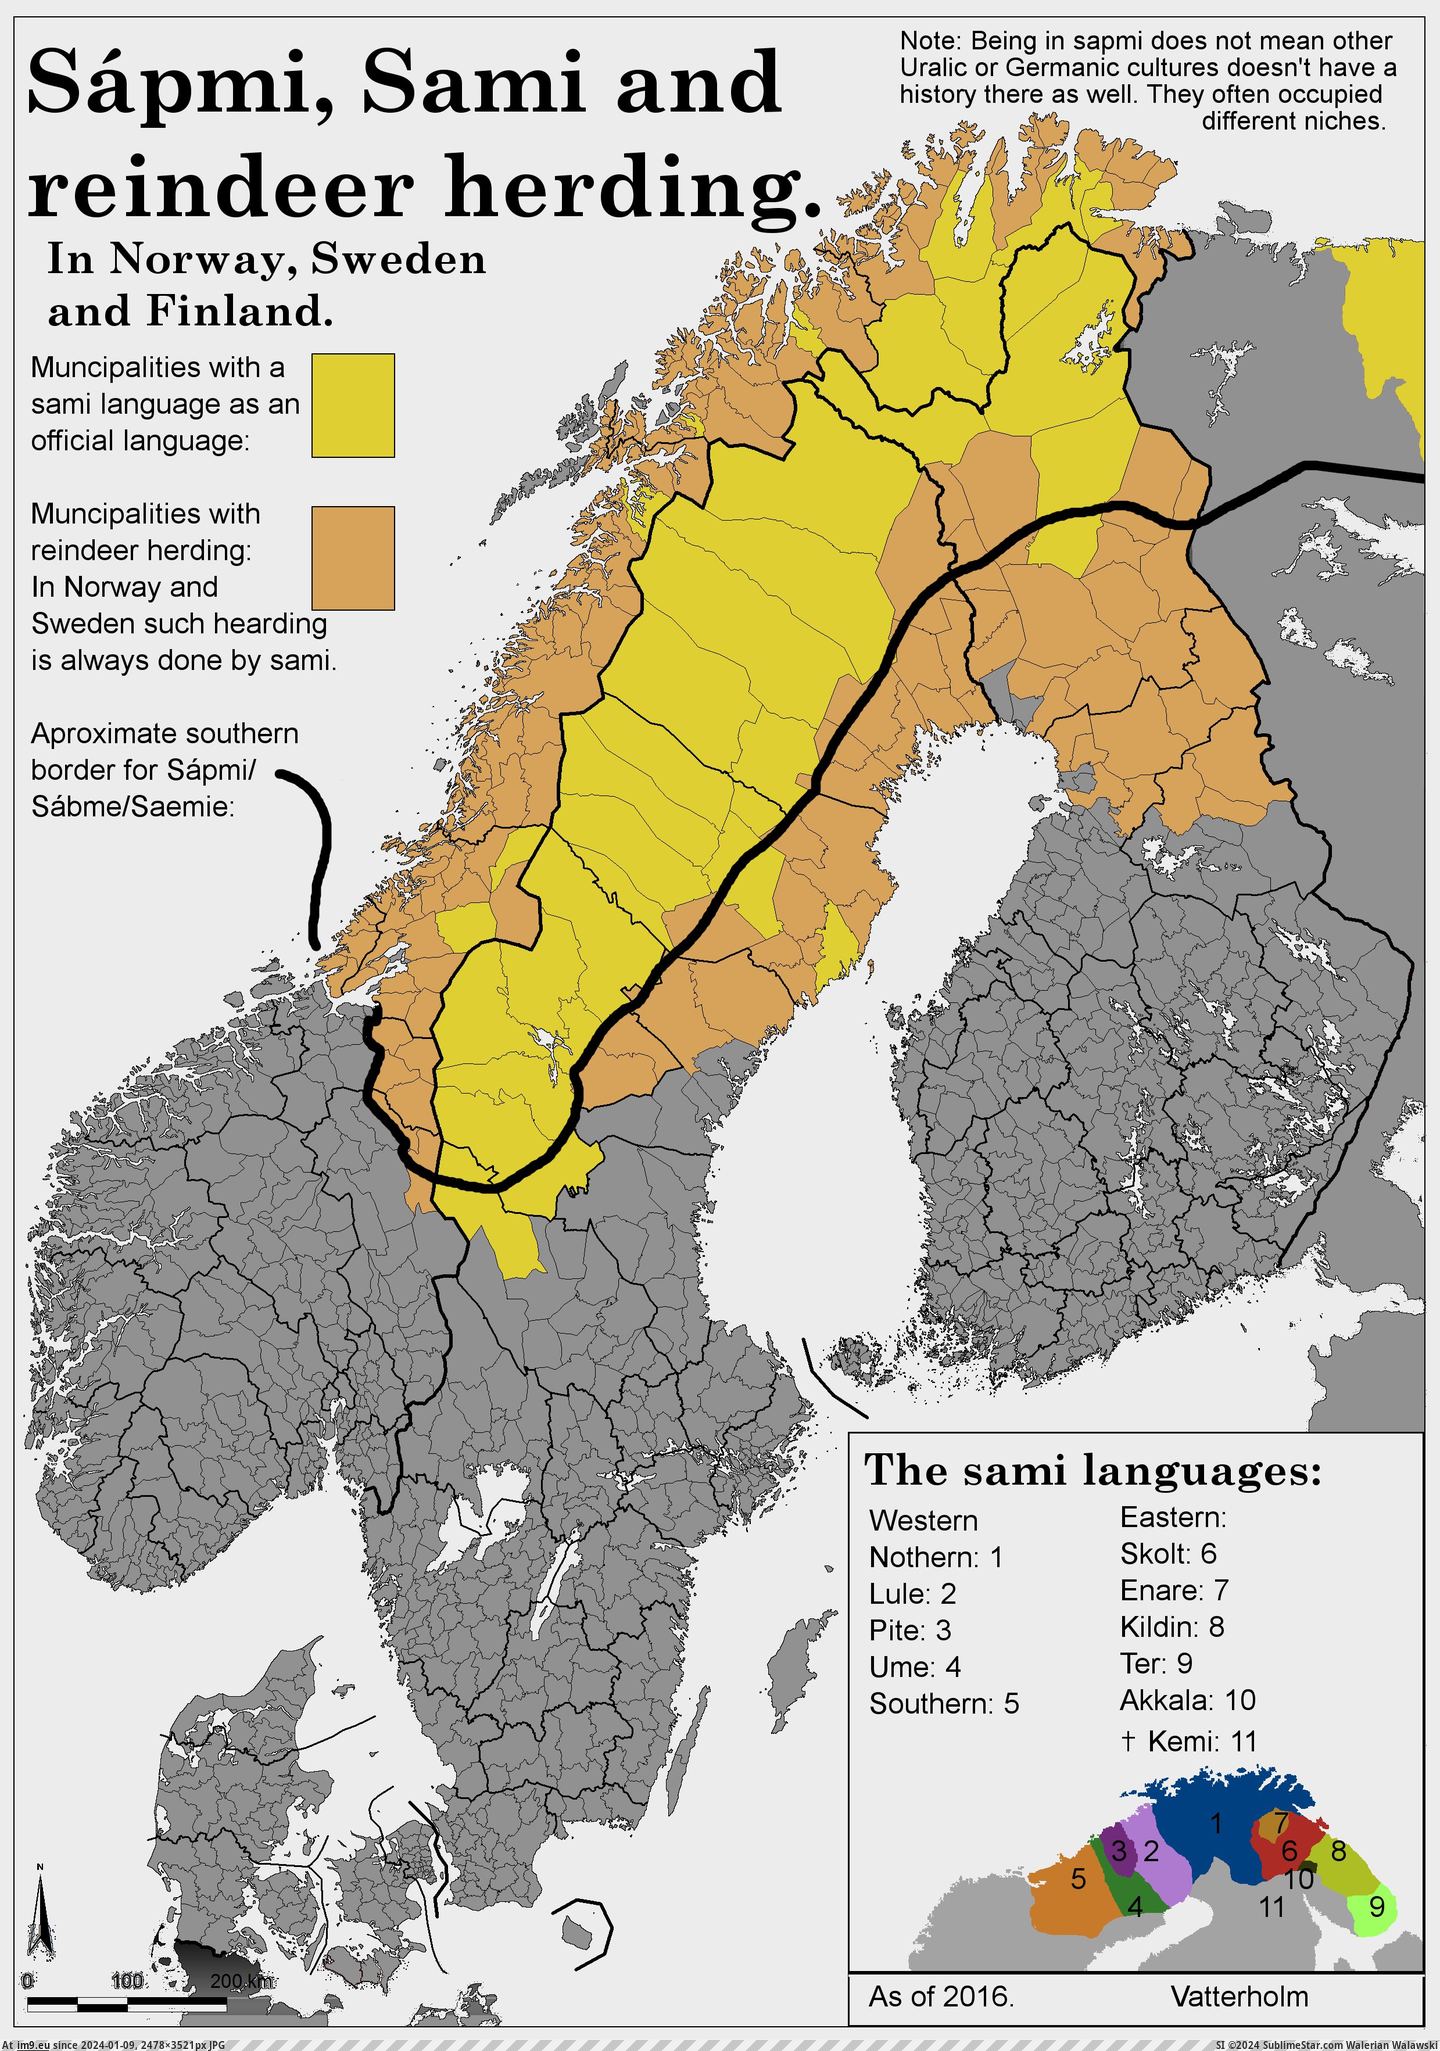 [Mapporn] In honour of the recent Sami National Day, the sami languages in Norway, Sweden and Finland.  [2478x3509] (in My r/MAPS favs)